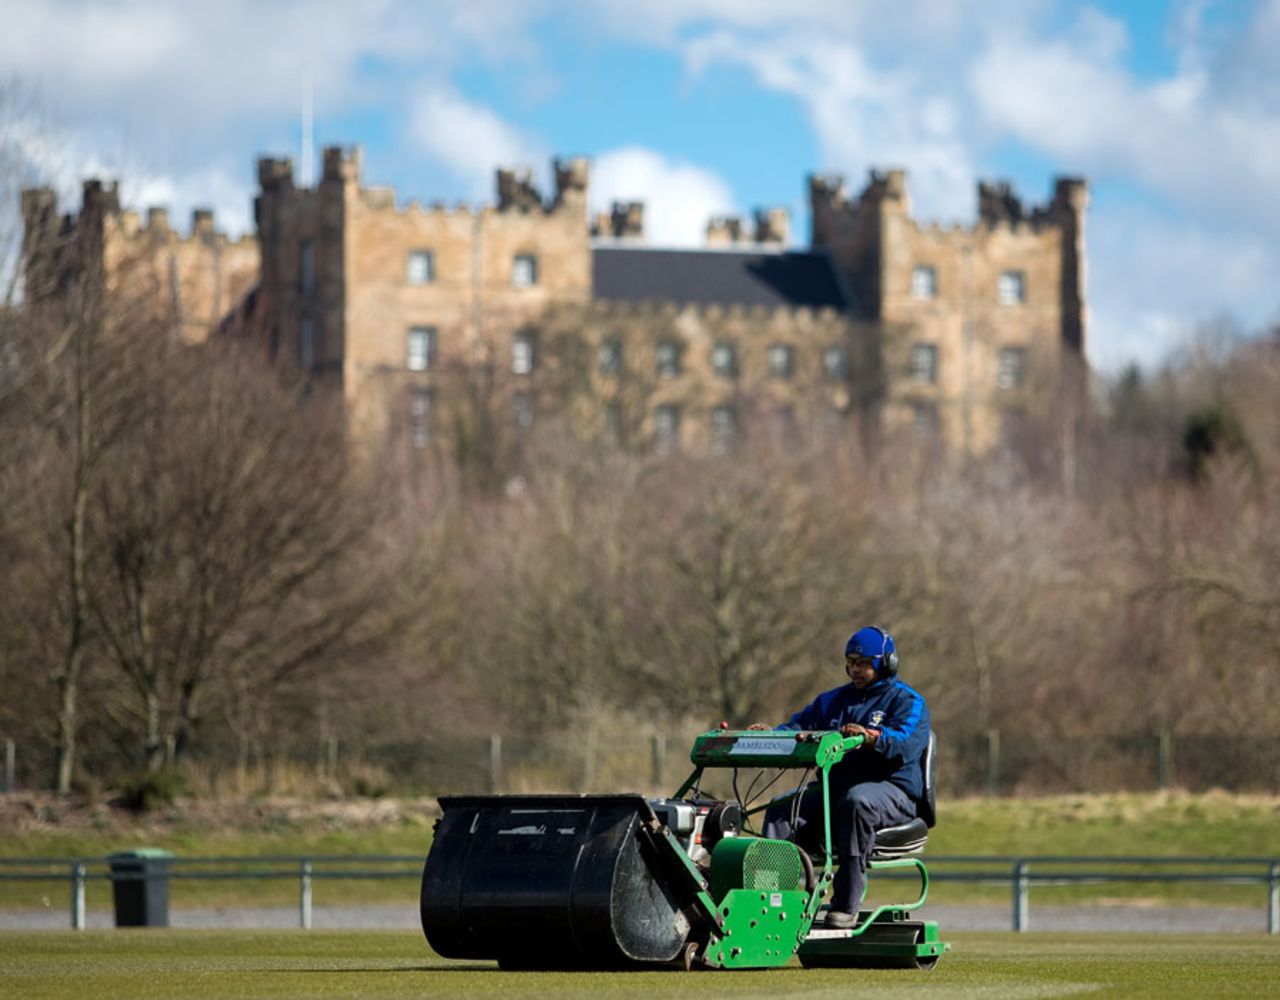 The Durham groundsman cuts the first wicket of the season, Chester-le-Street, April, 4, 2013